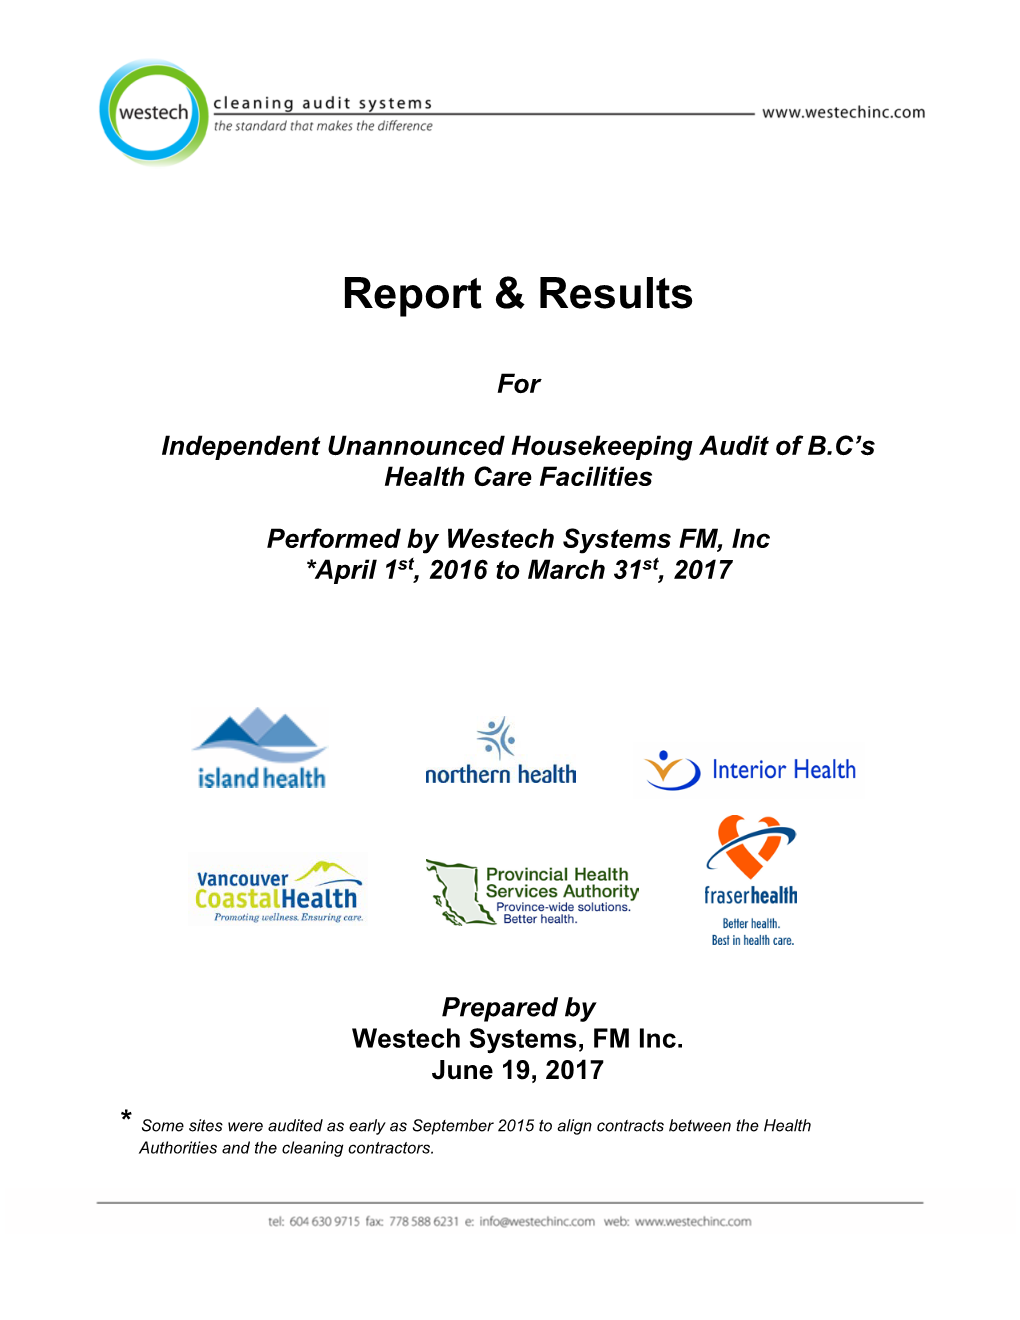 Independent Housekeeping Audit Process and Results of the B.C